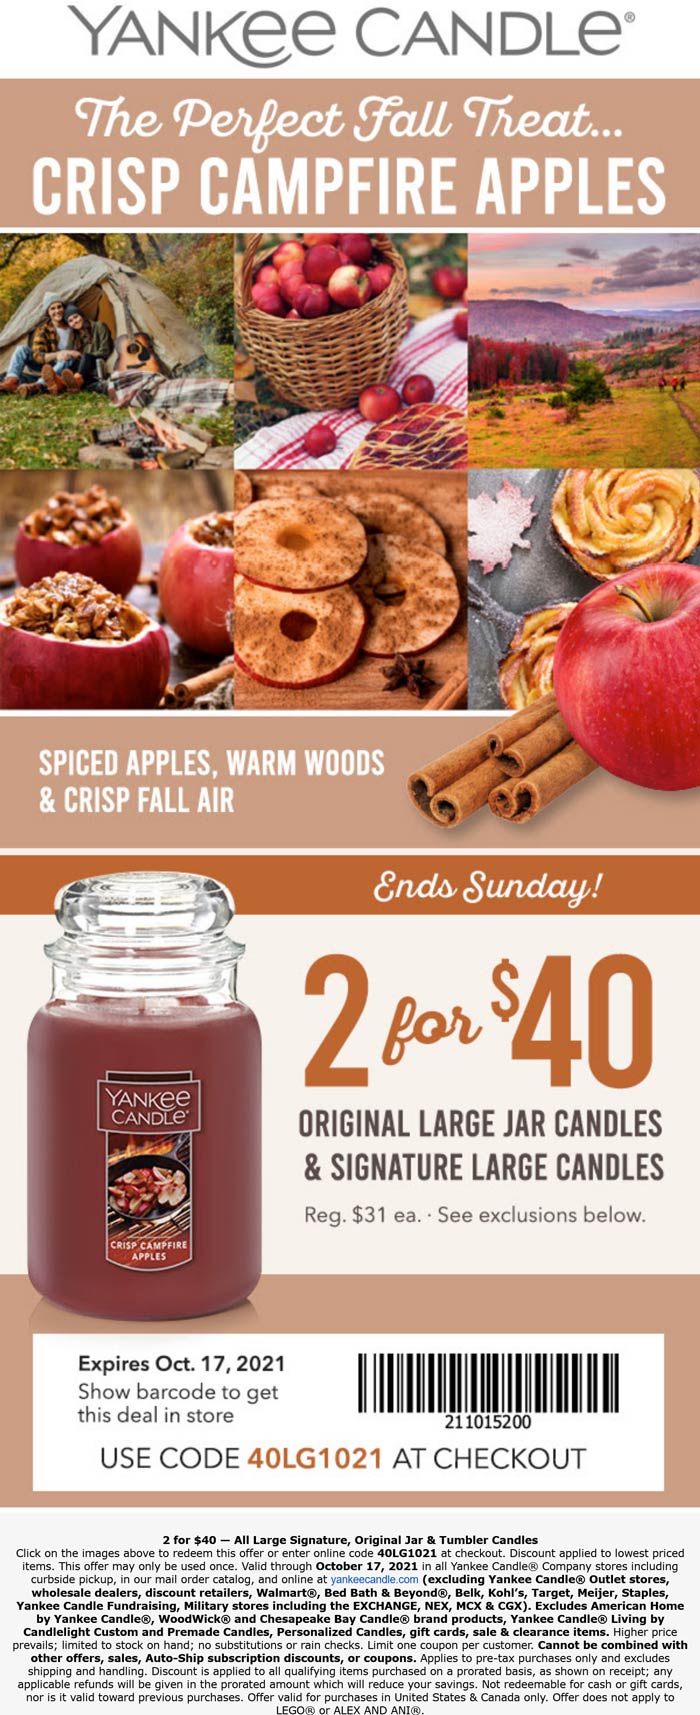 Yankee Candle stores Coupon  Large candles 2 for $40 at Yankee Candle, or online via promo code 40LG1021 #yankeecandle 